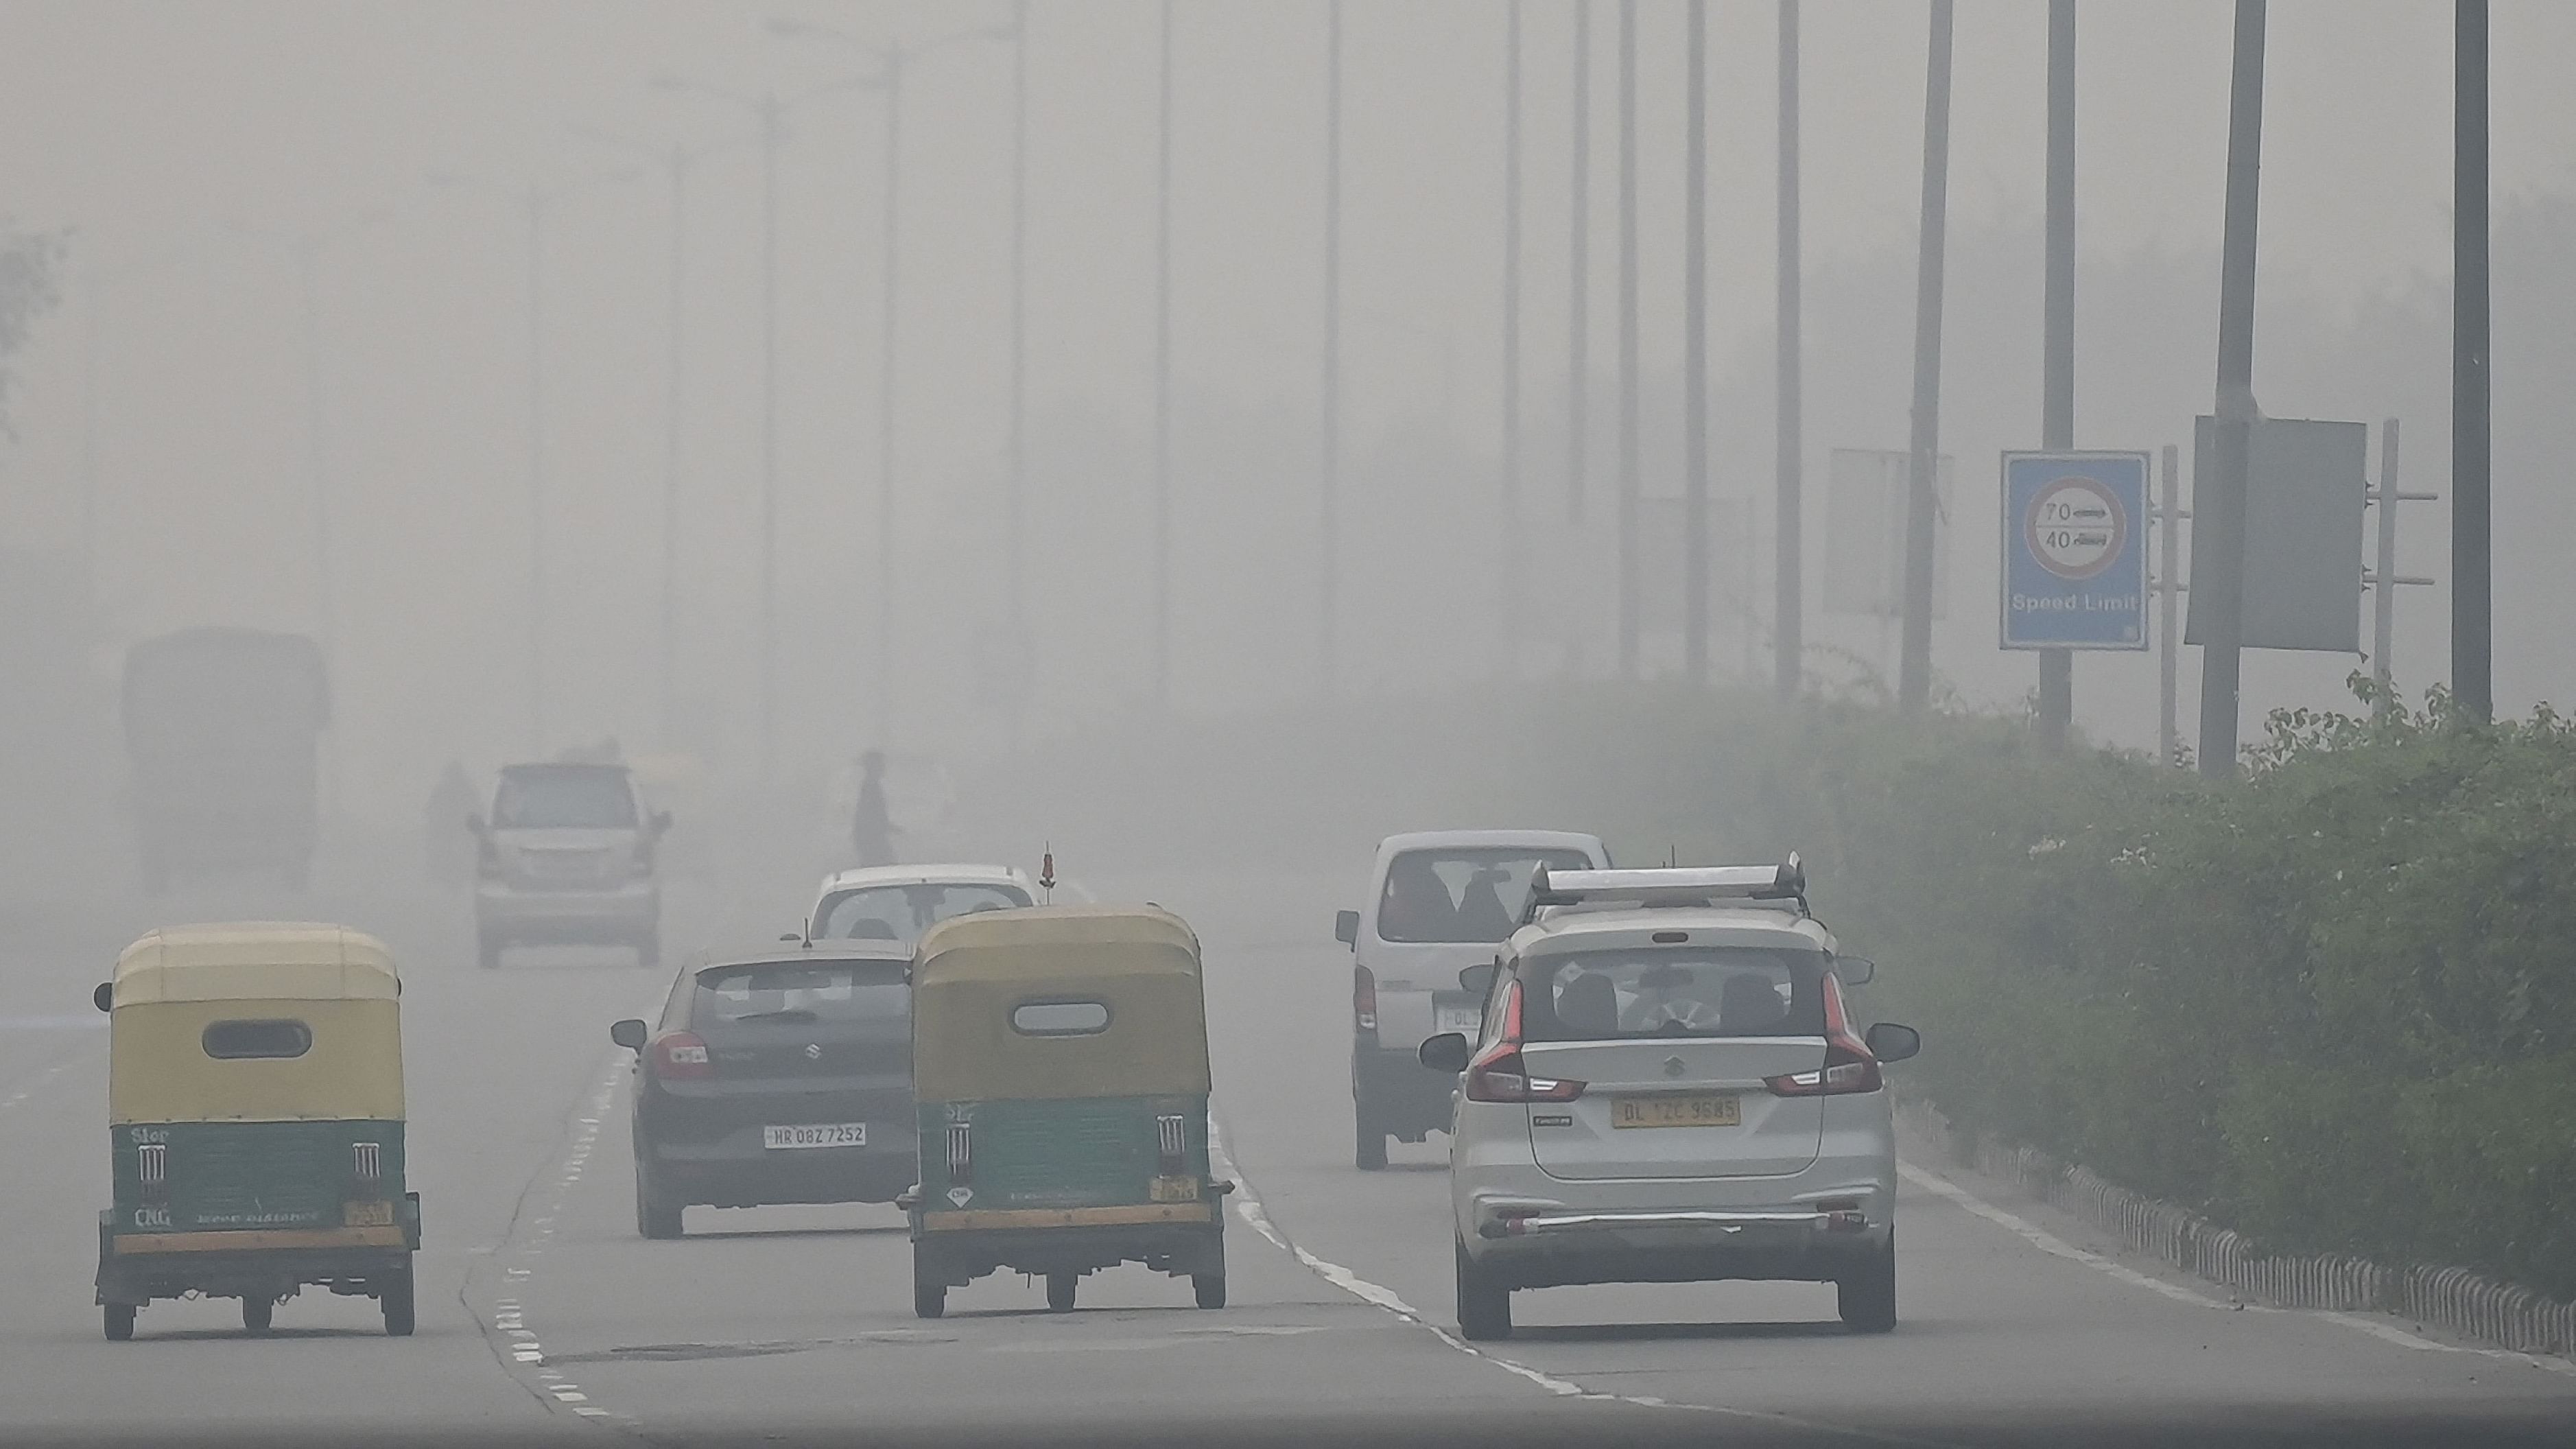 Commuters make their way along a road amid smoggy conditions in New Delhi on 21 Nov, 2021. Credit: AFP File Photo 